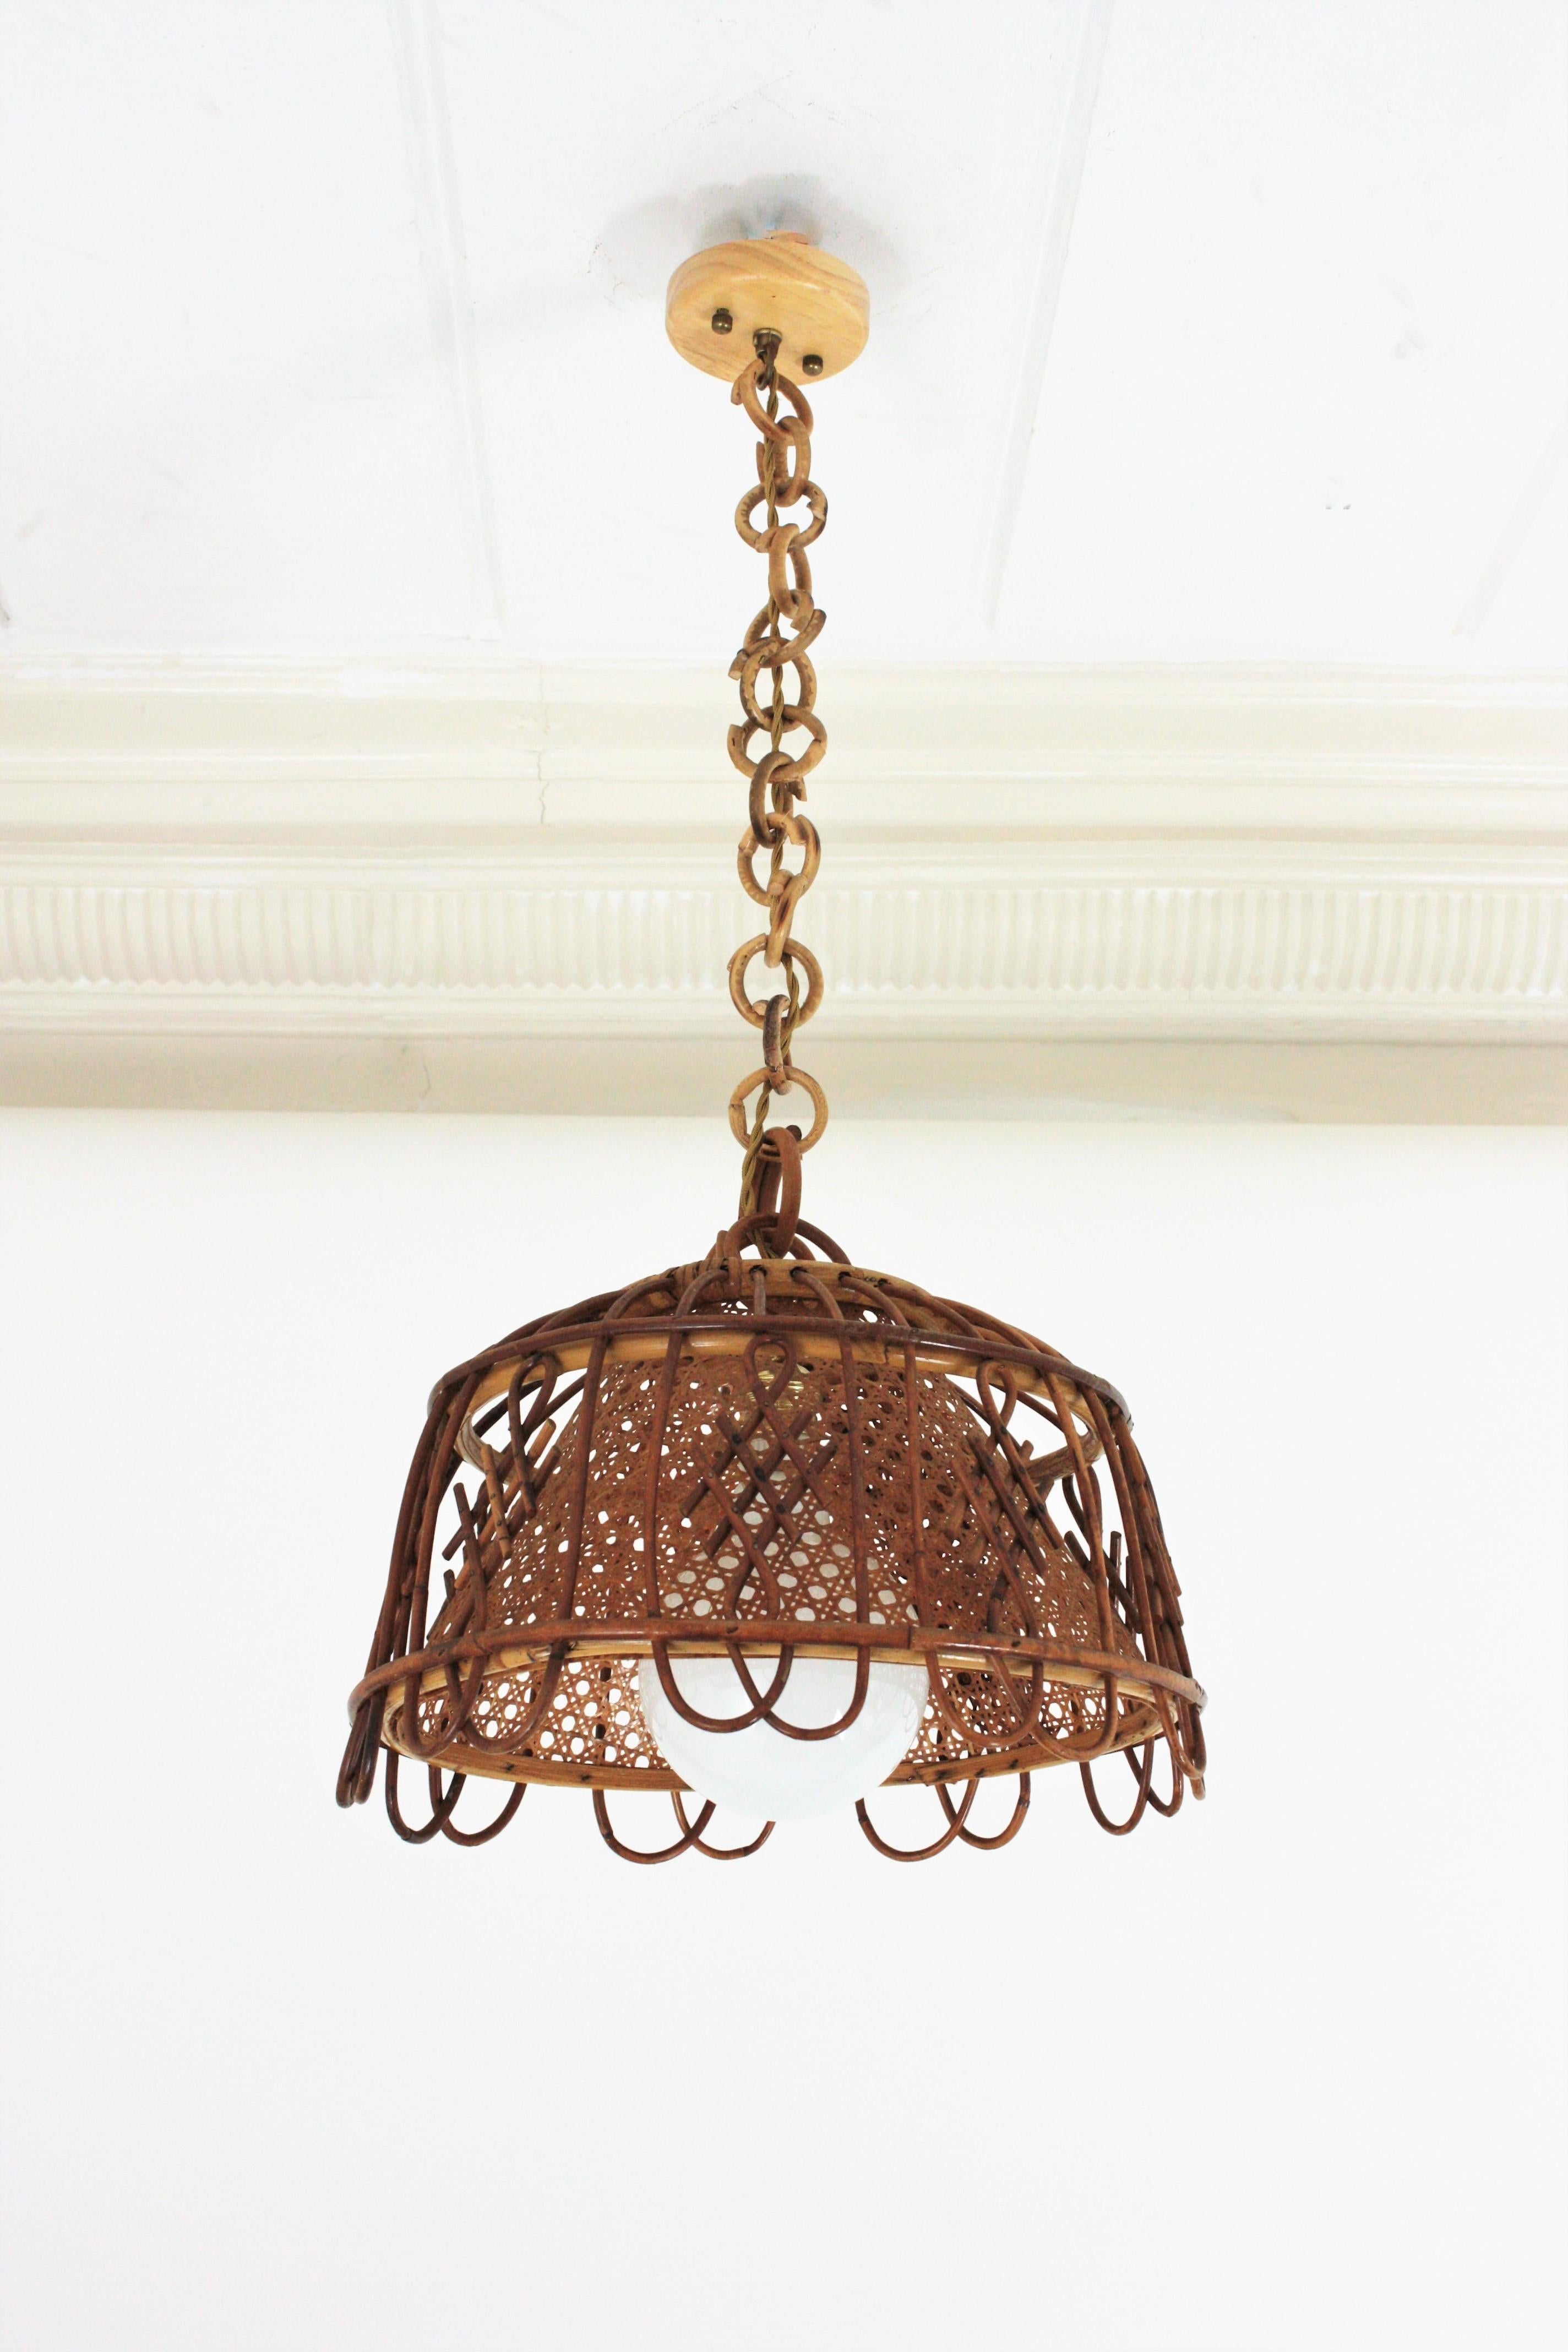 Hand-Crafted Rattan and Wicker Wire Italian Modernist Pendant / Hanging Light, 1960s